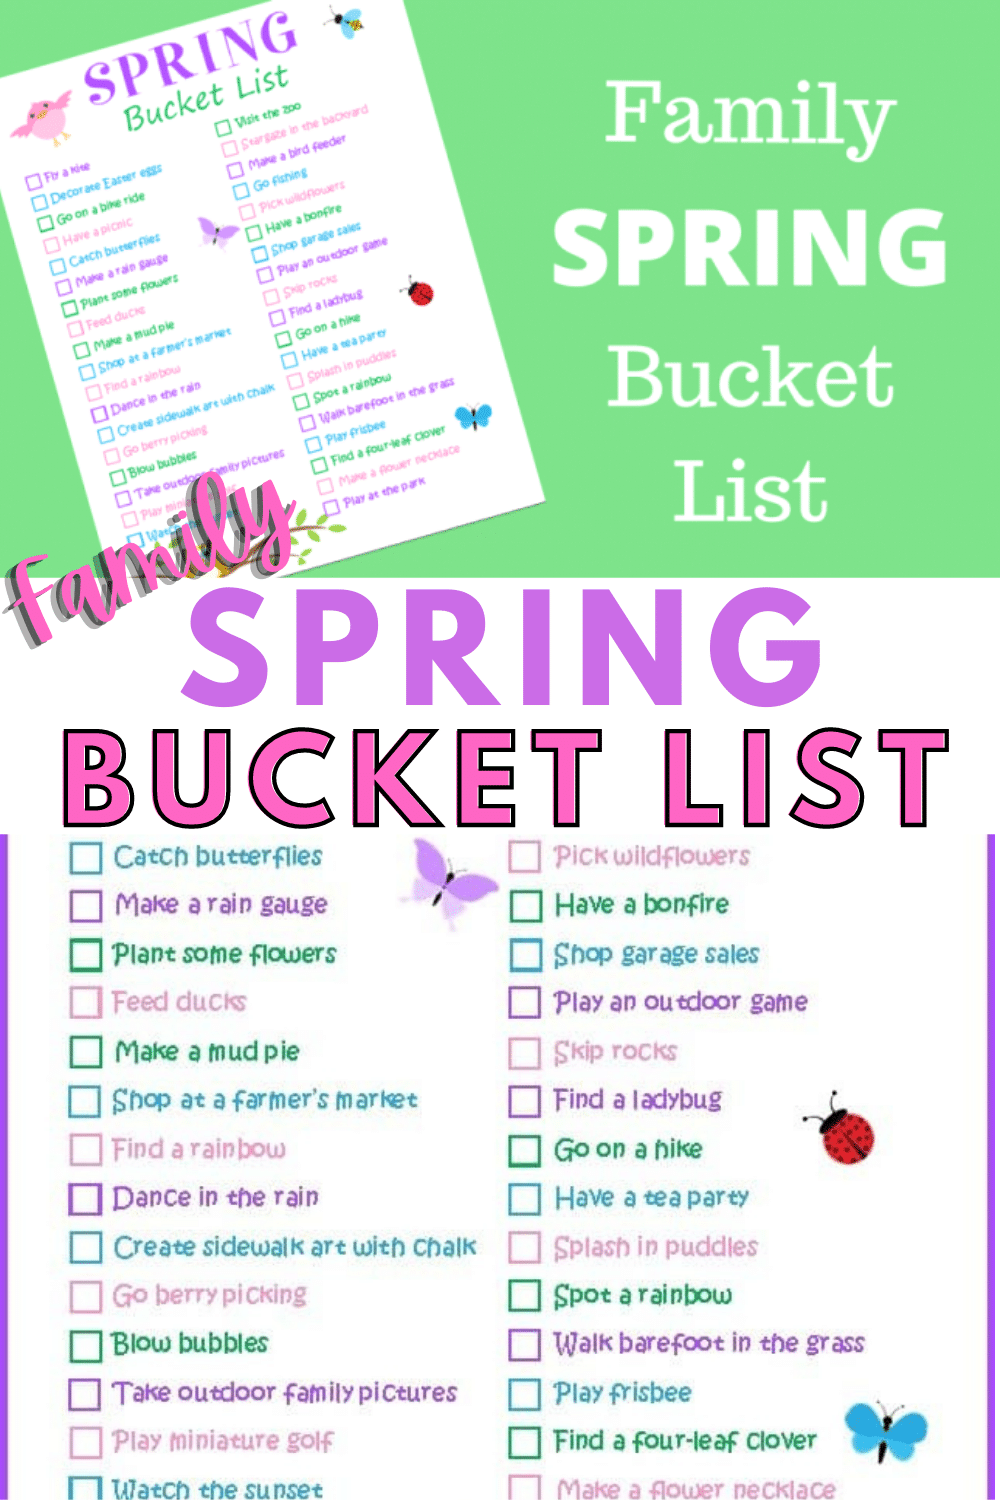 This Spring Bucket List is full of fun ideas the whole family will enjoy so you can get outdoors and enjoy the beautiful weather. #bucketlist #spring #outdooractivities #forkids via @wondermomwannab